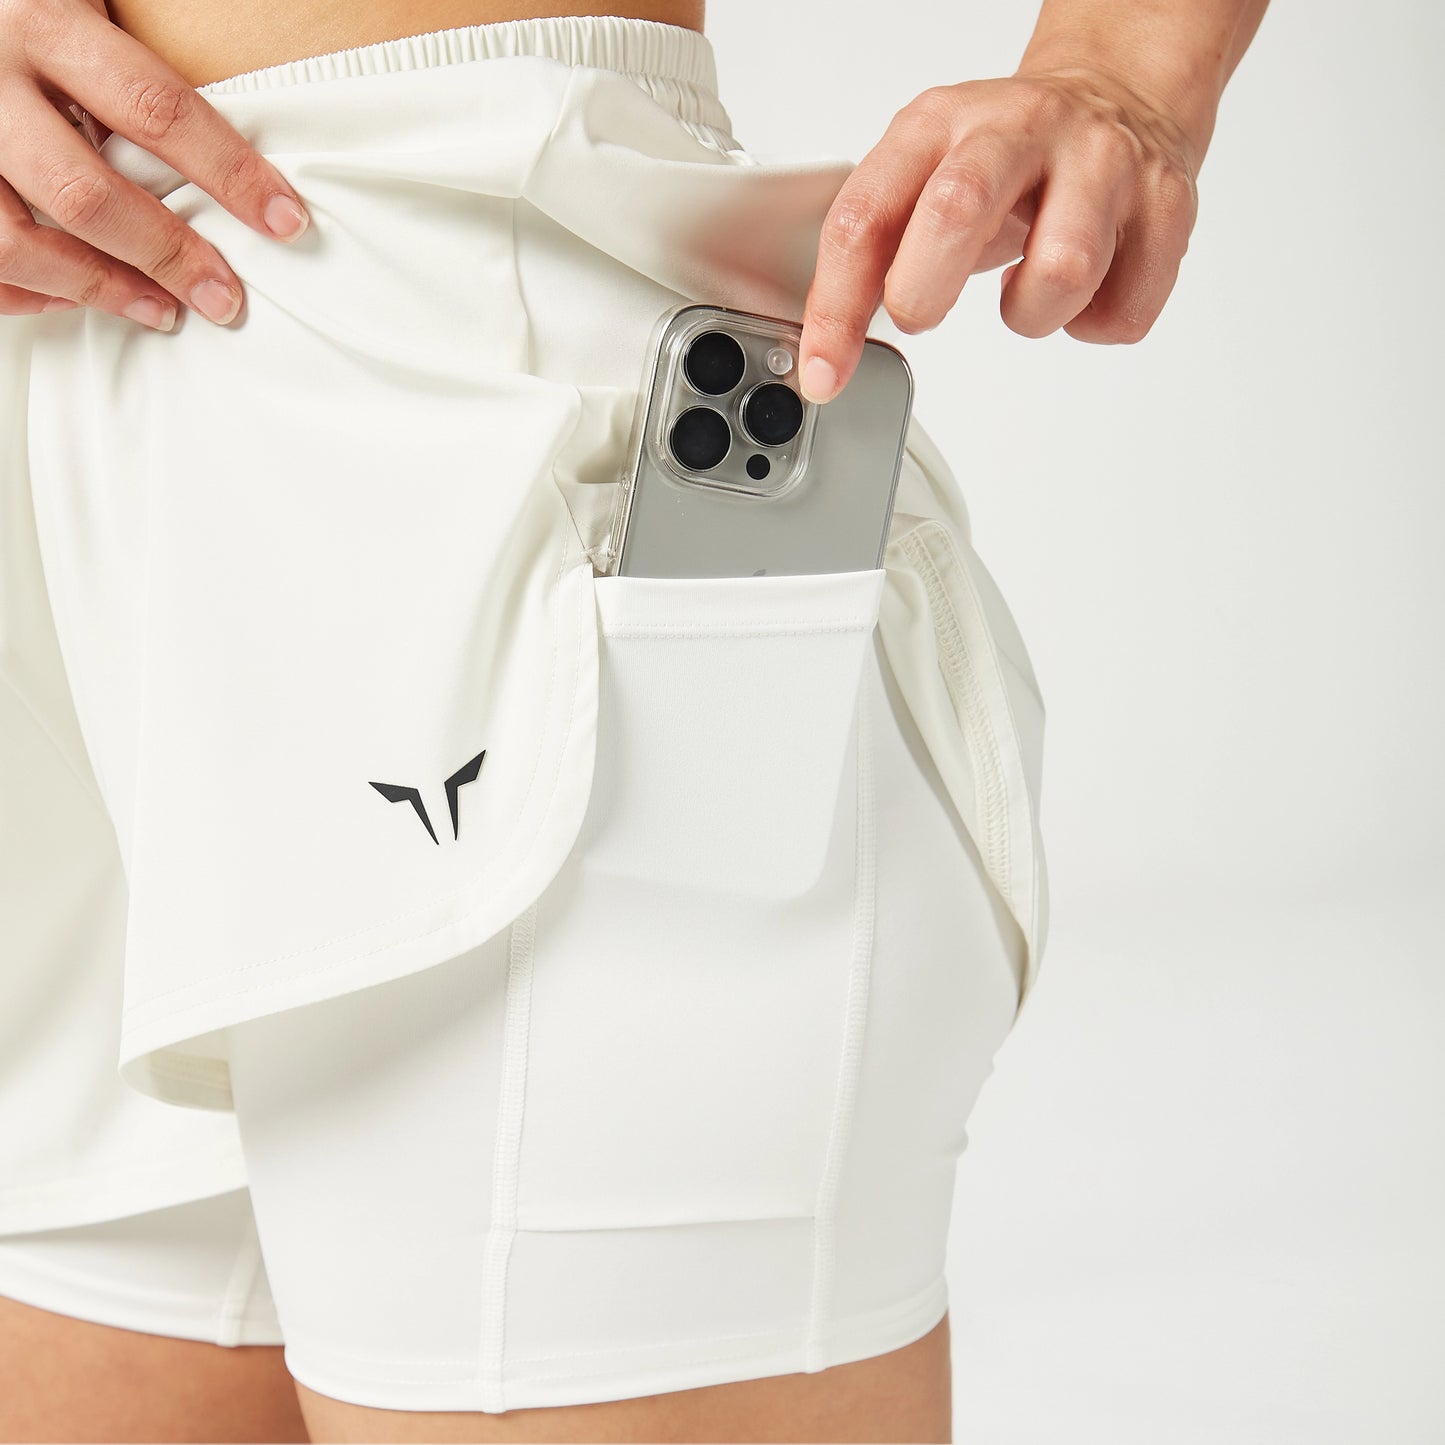 Essential 2-in-1 Shorts - Pearl White